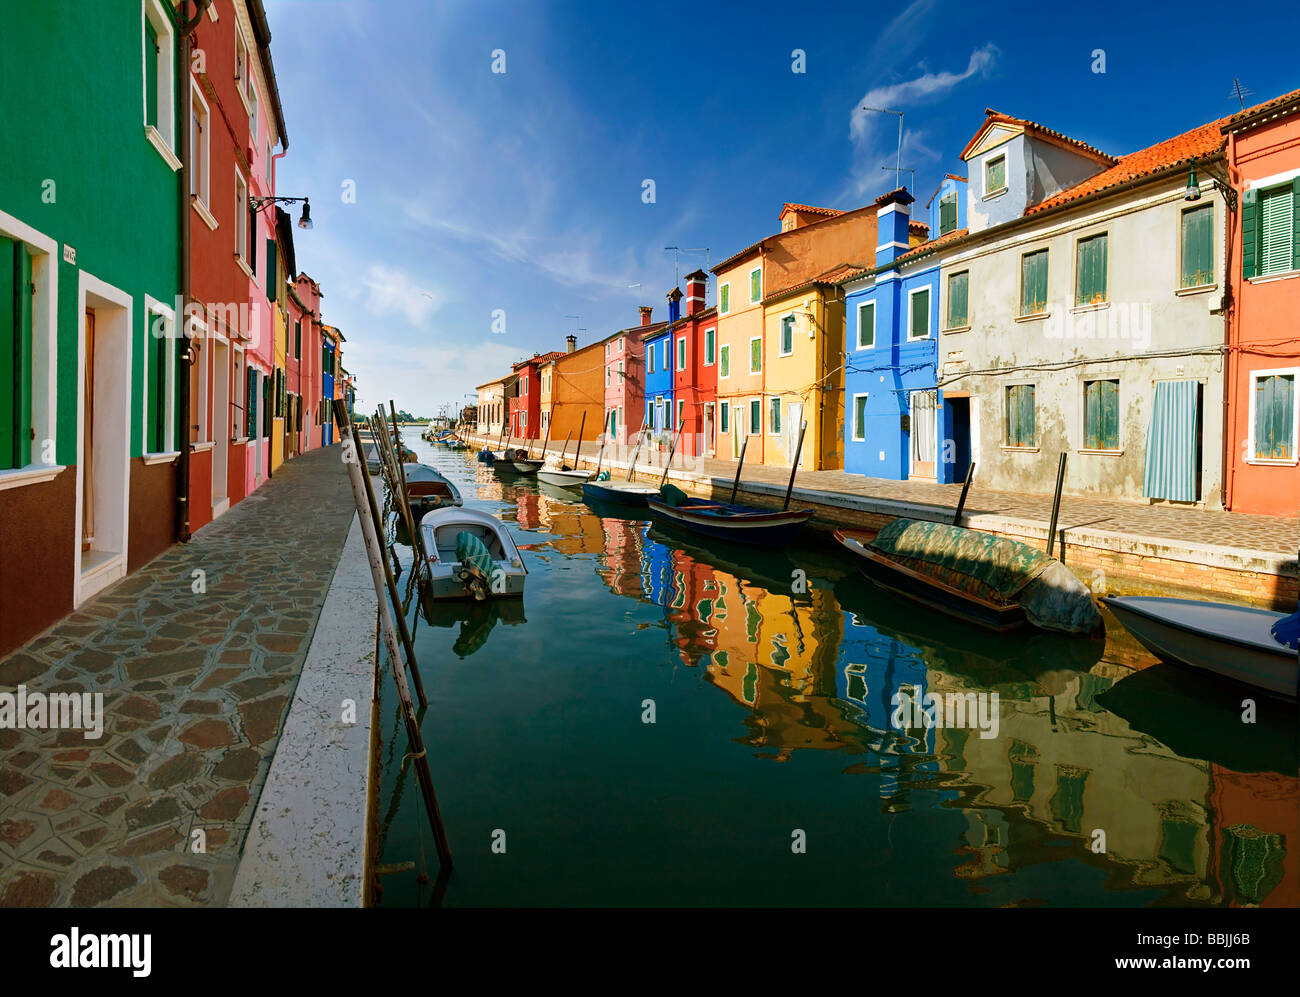 Panoramic view of the city and the colorfully painted houses and canals of Burano, Venice, Italy, Europe Stock Photo